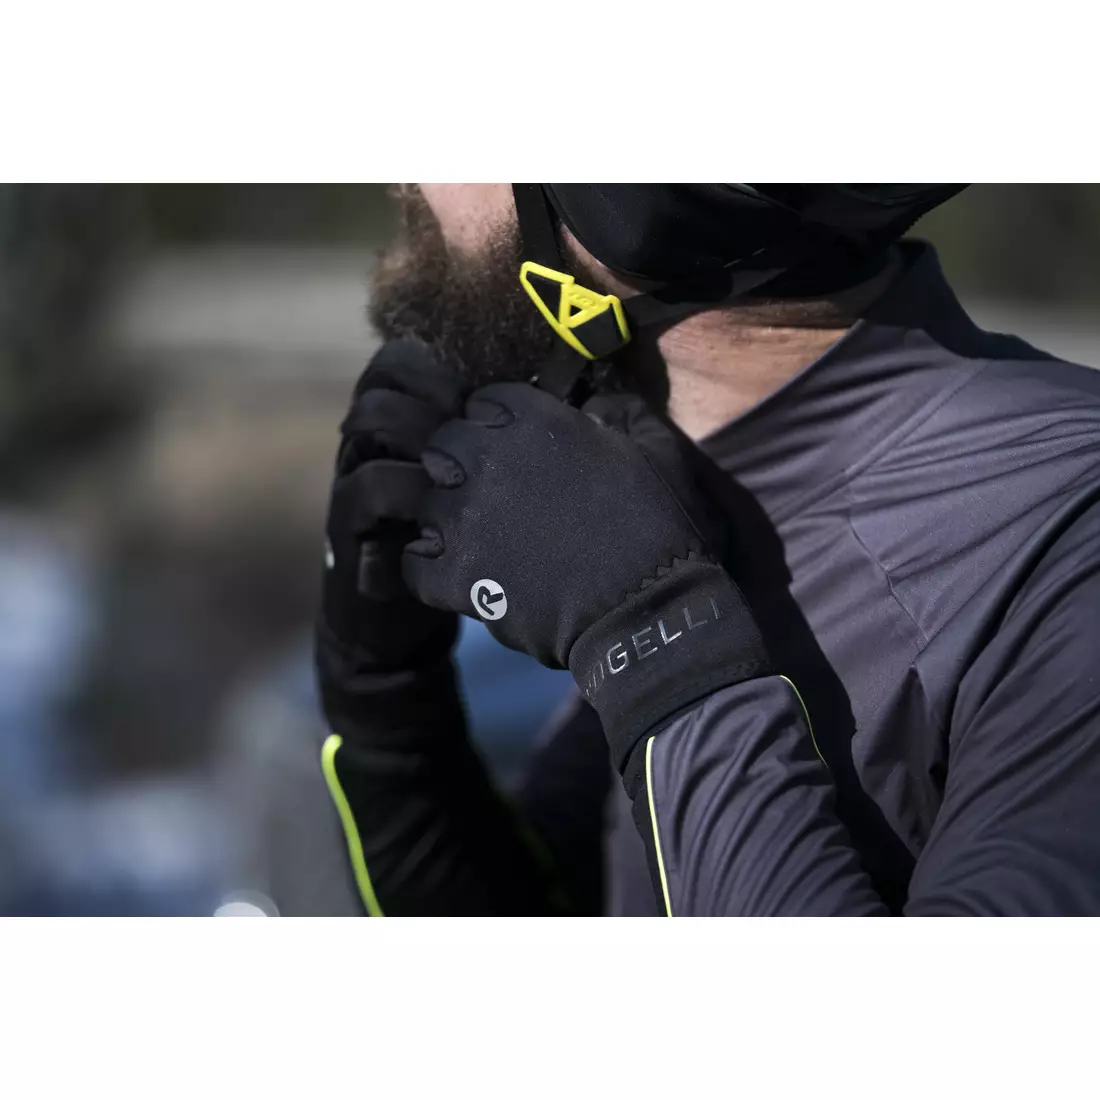 ROGELLI QLIMATE transitional insulated universal bicycle gloves, black